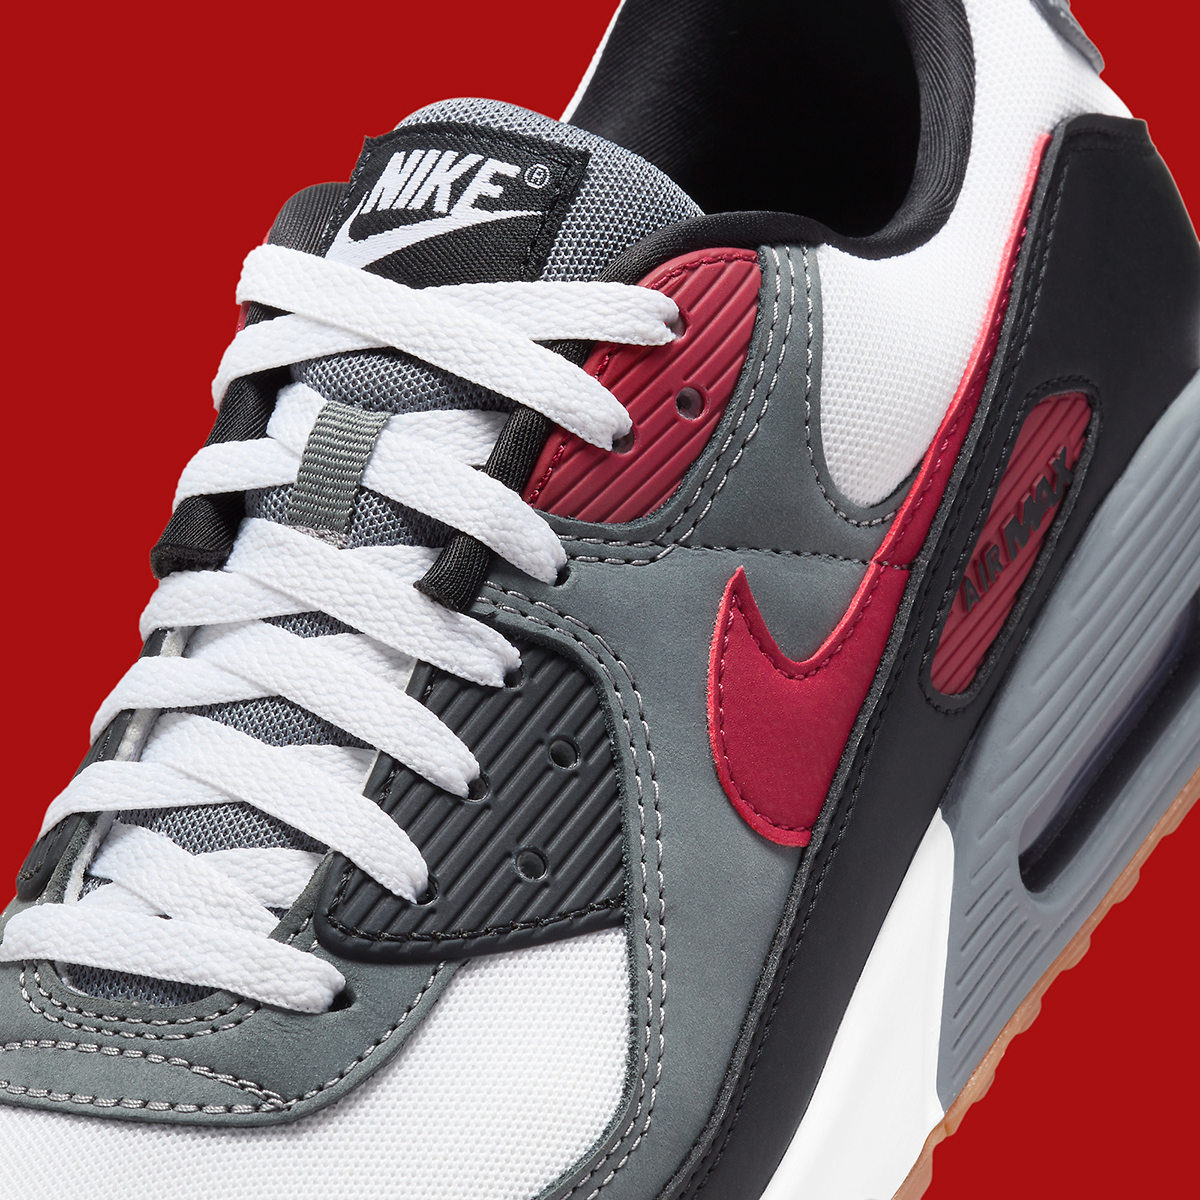 nike air prestige 2 high power system requirements White Team Red Black Fb9658 100 1